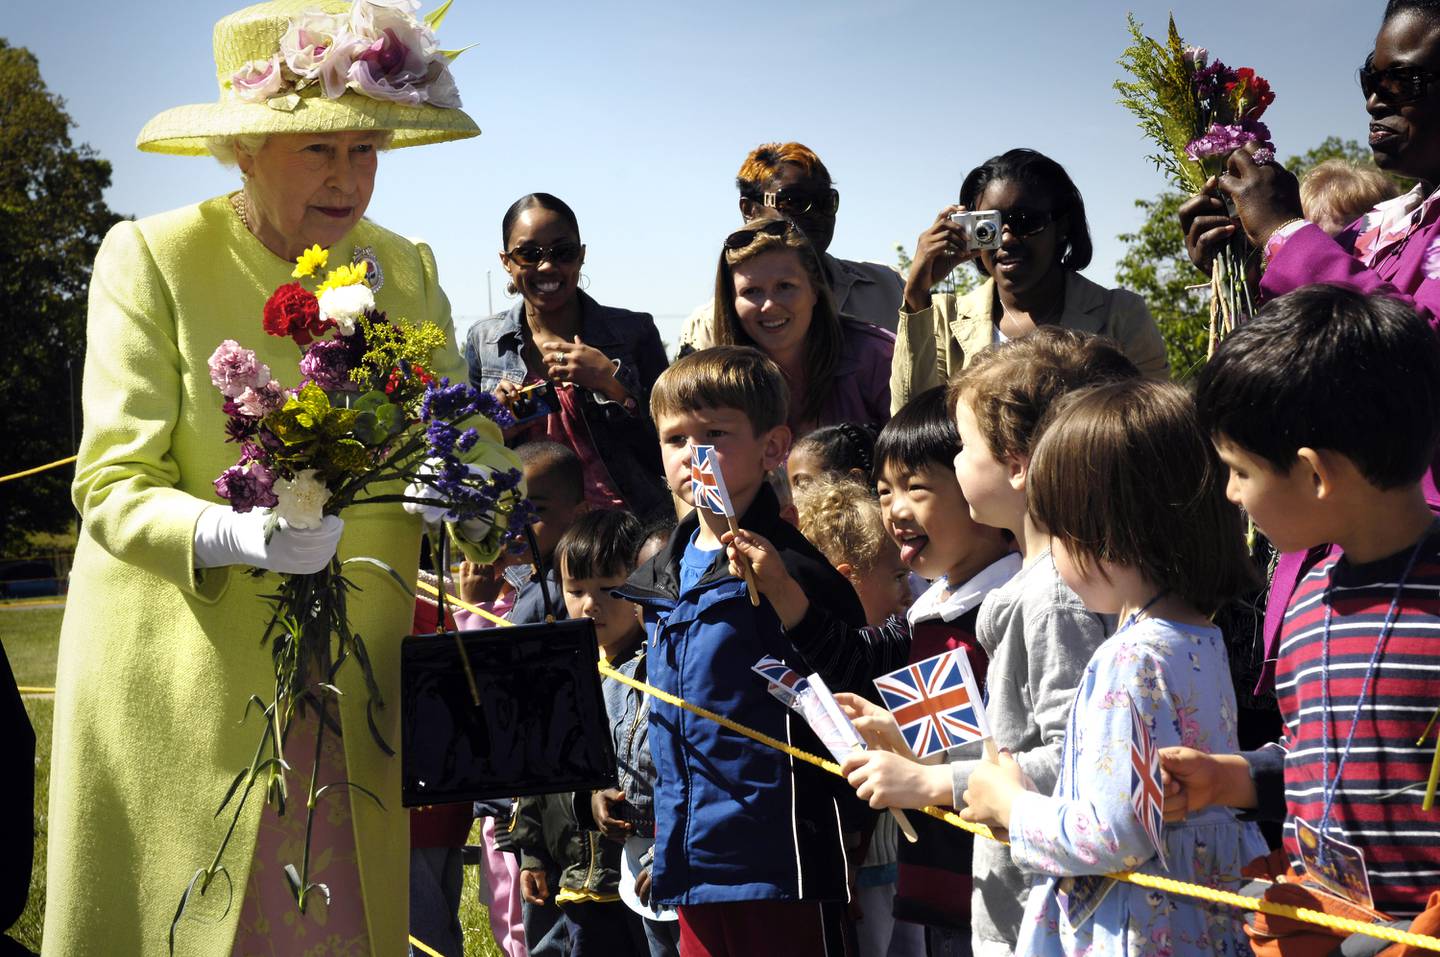 HM Queen Elizabeth II is greeted by children on her walk from NASA’s Goddard Space Flight Center mission control to a reception in the center’s main auditorium May 8, 2007 in Greenbelt, Maryland. The queen is on the last of a six-day visit to the U.S with her husband, Prince Philip, the Duke of Edinburgh.